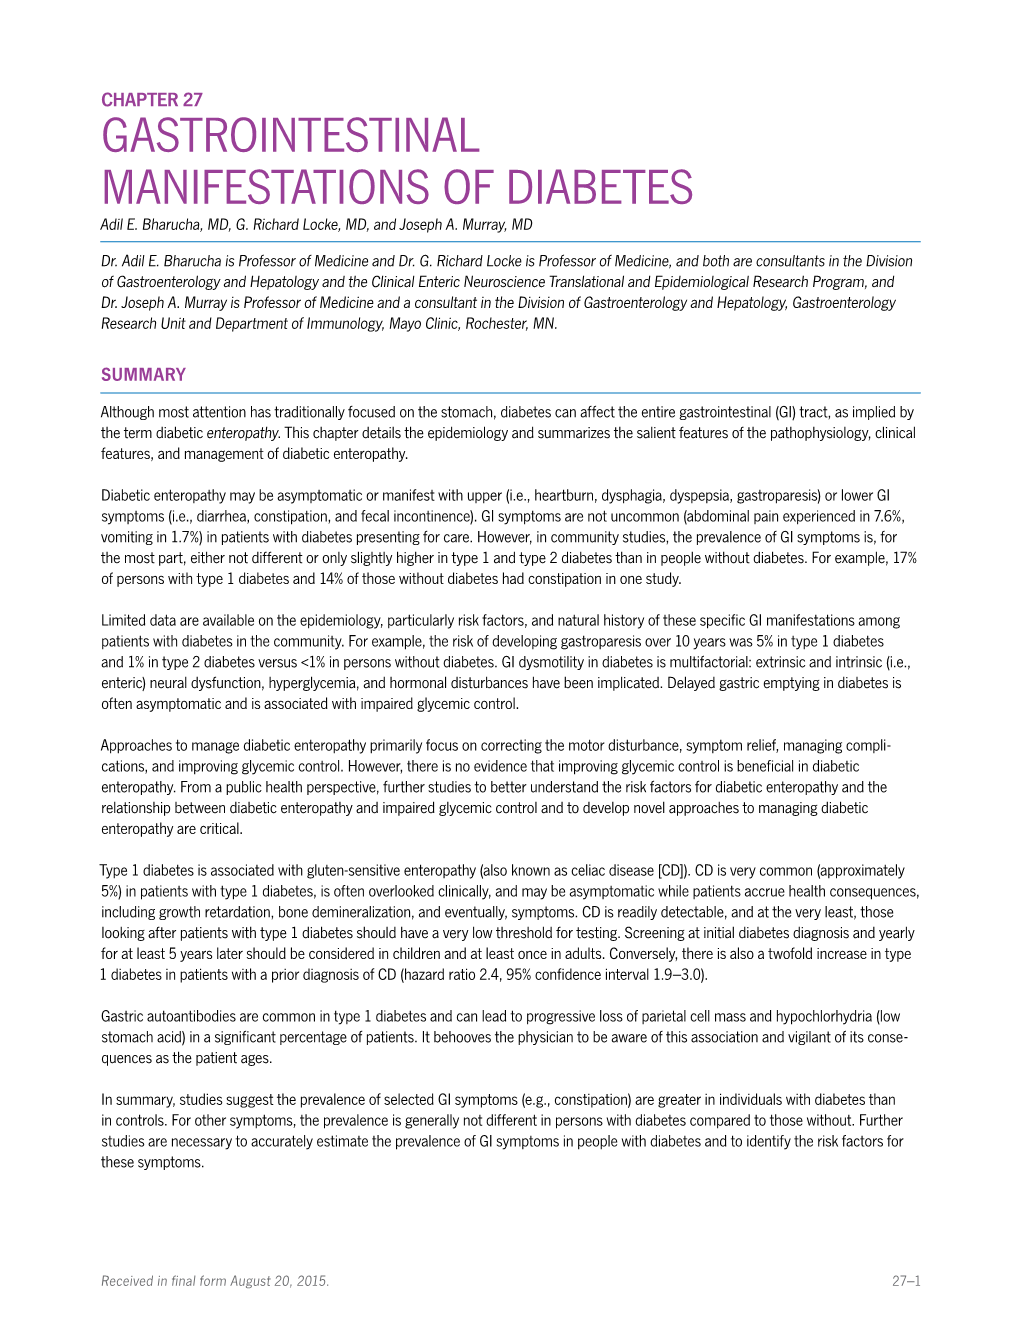 Chapter 27: Gastrointestinal Manifestations of Diabetes